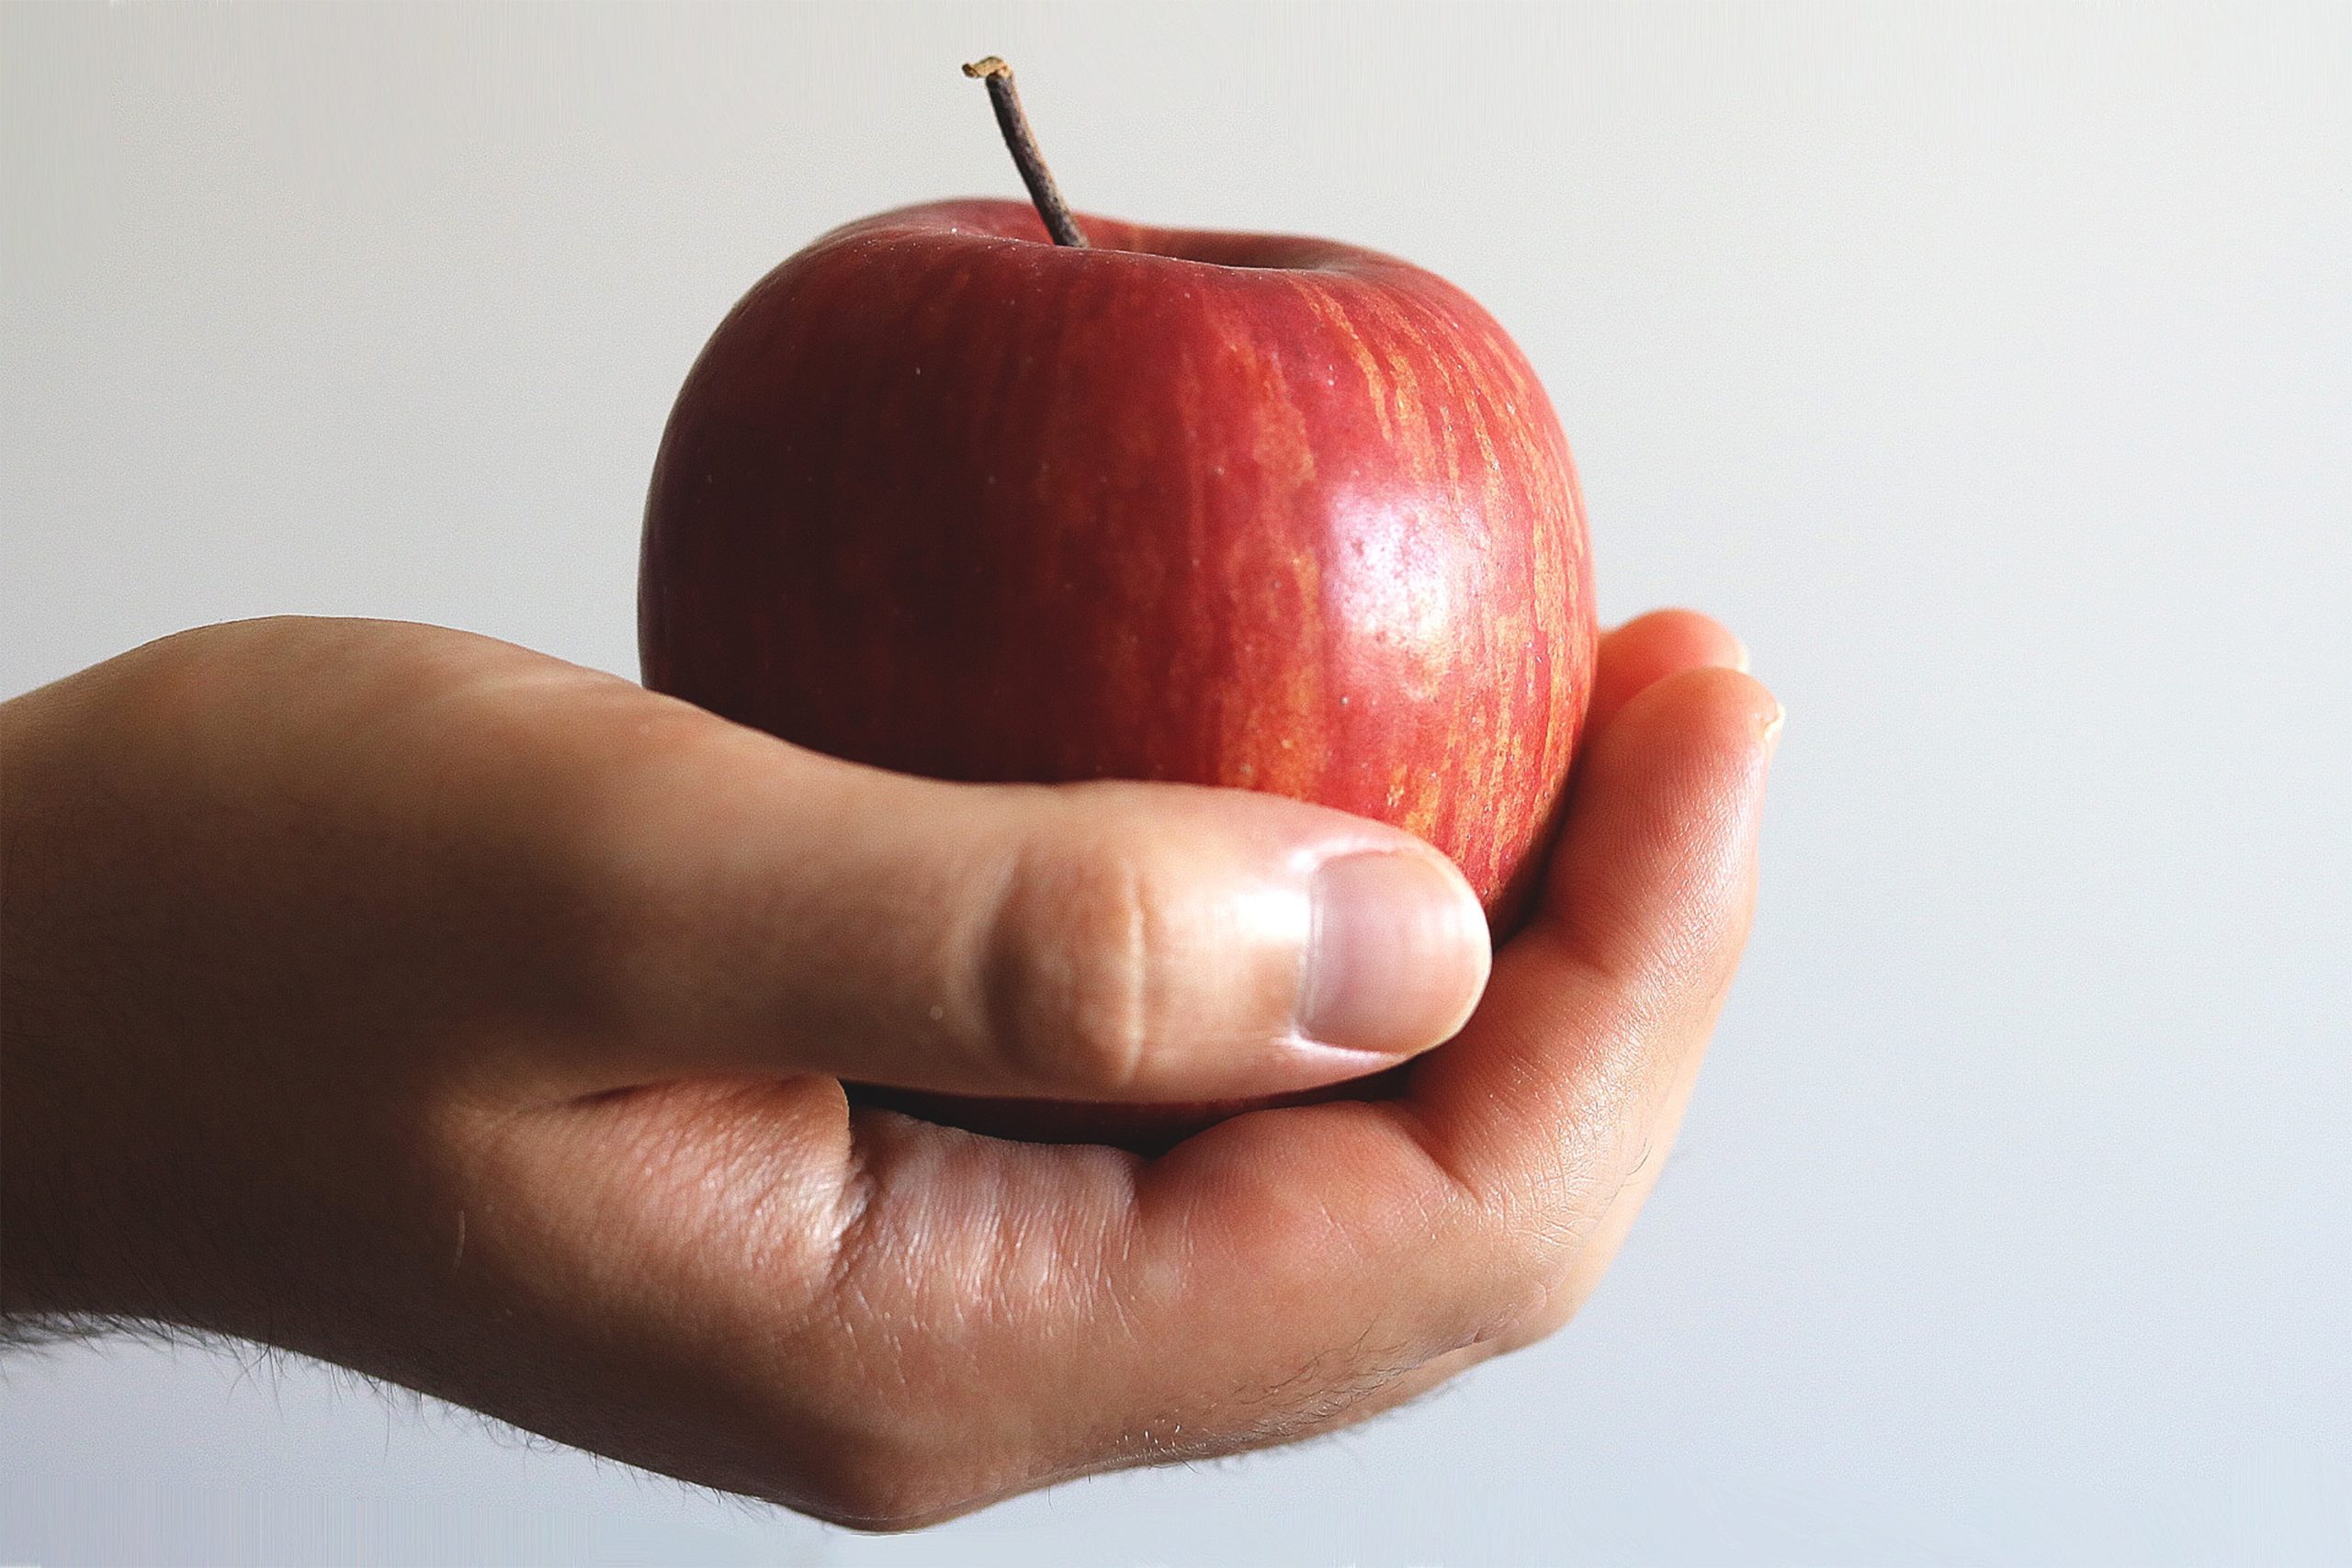 Hand holding a red apple